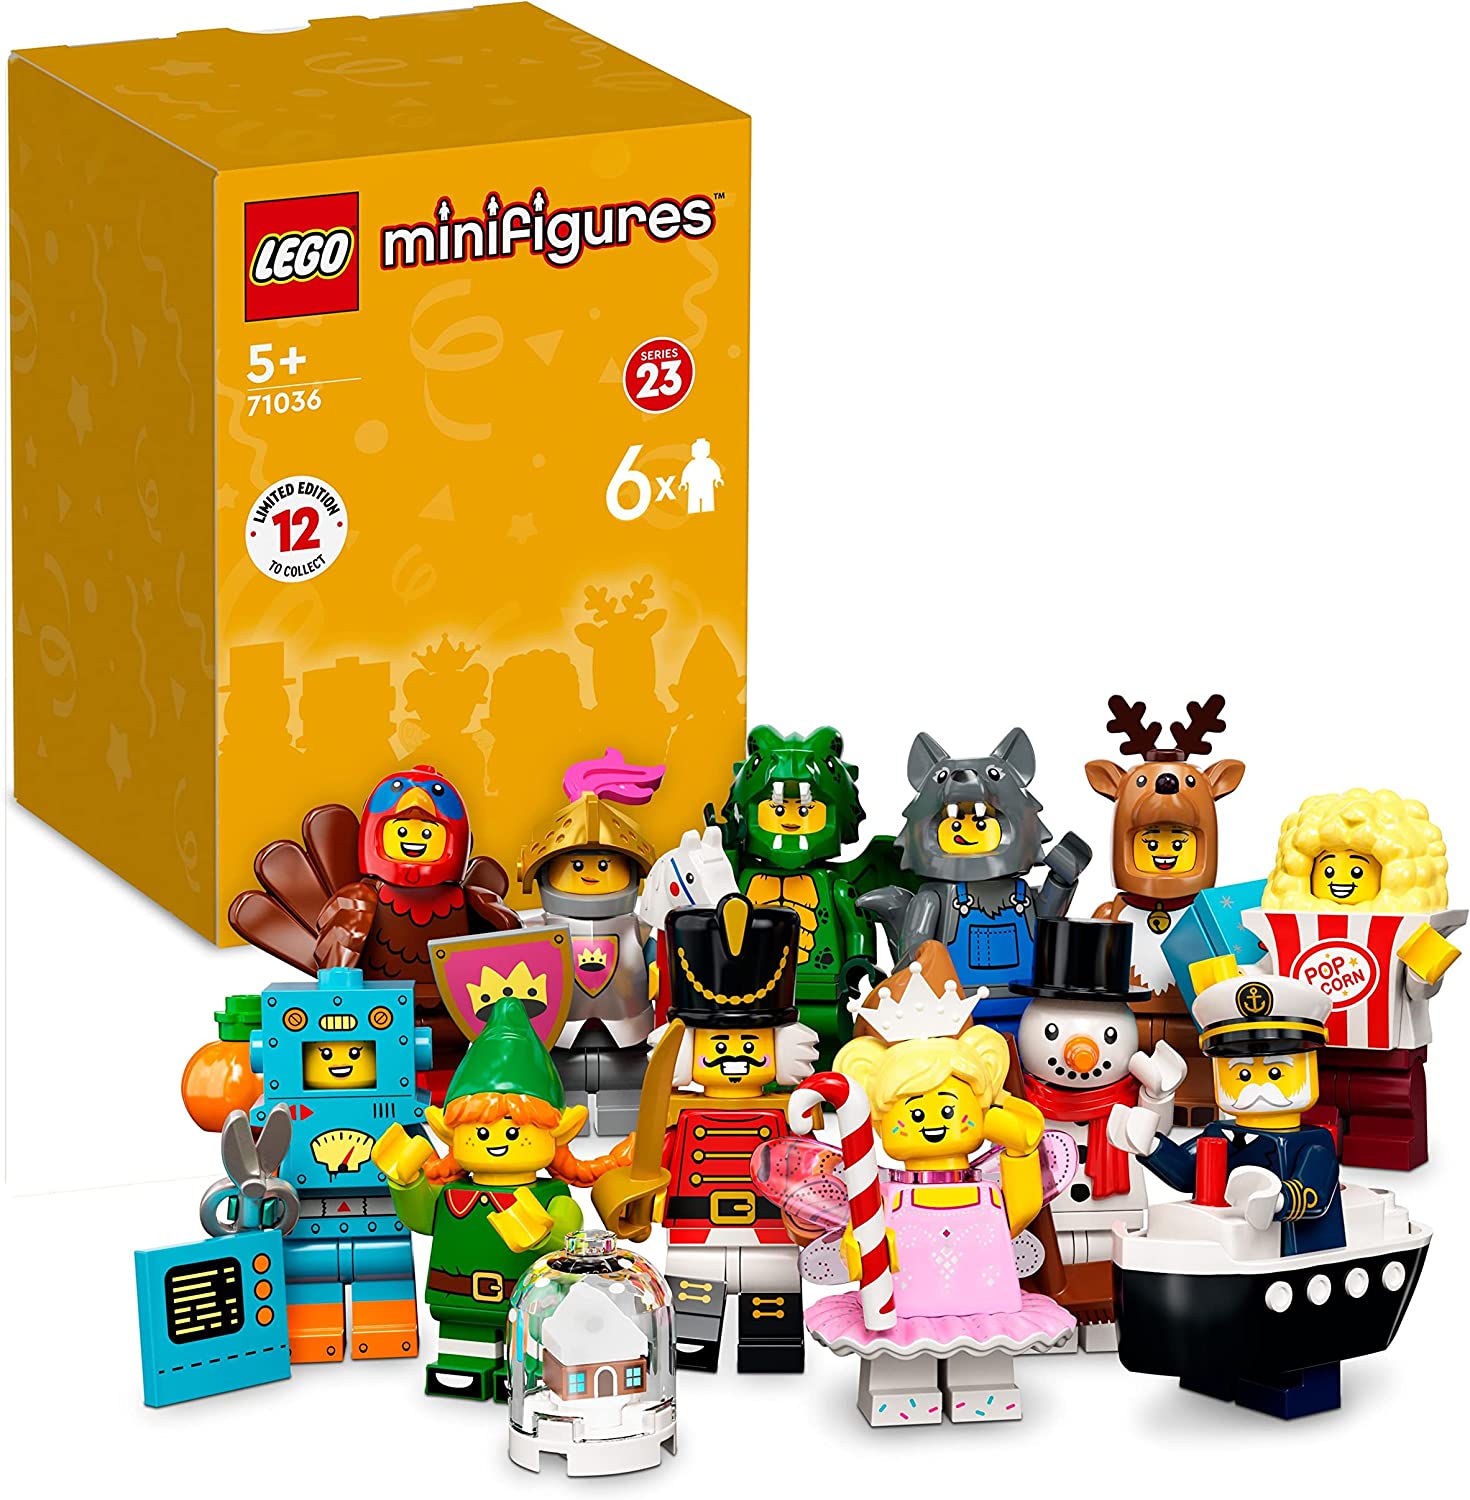 LEGO 71036 Minifigures Series 23 - Pack of 6, Limited Edition 2022, Surprise Bag with 6 Random Minifigures of 12